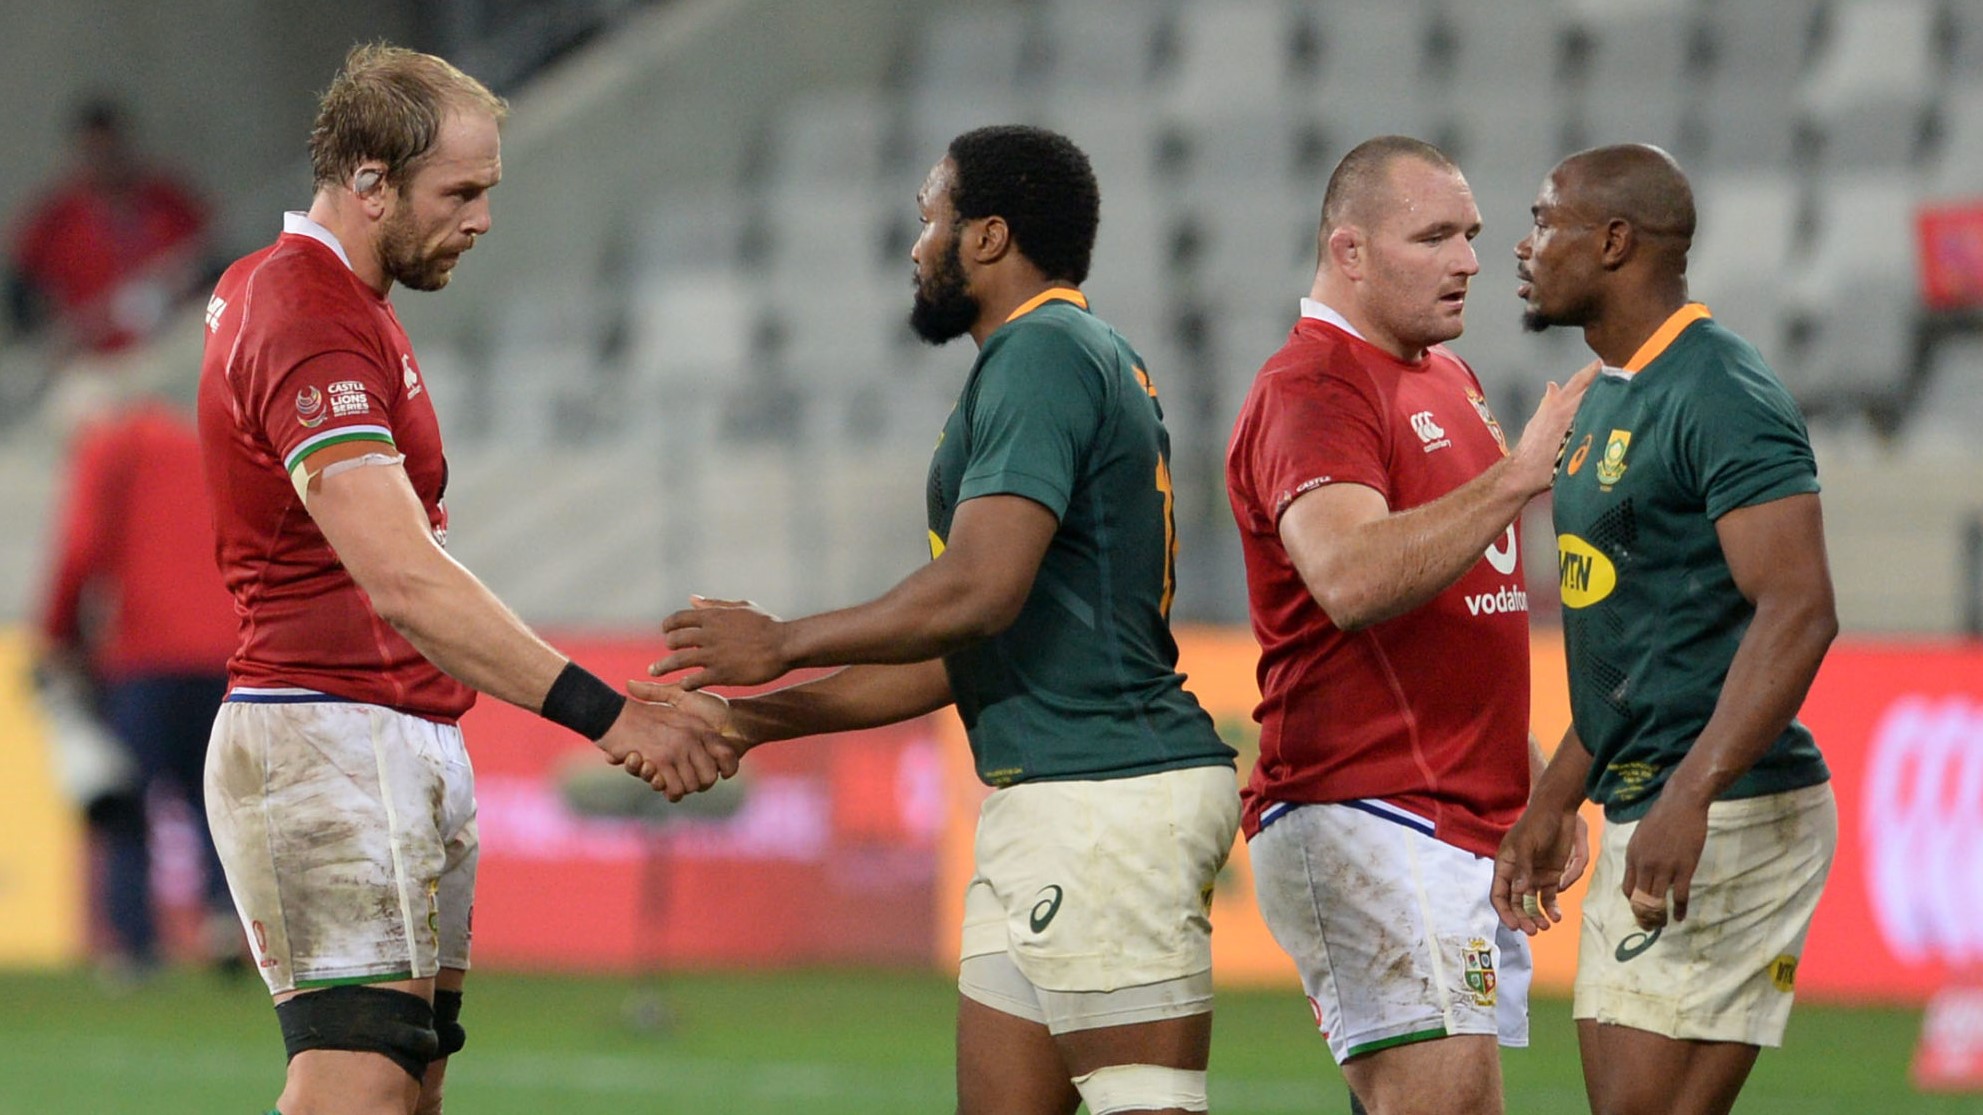 Lions and Boks after the game